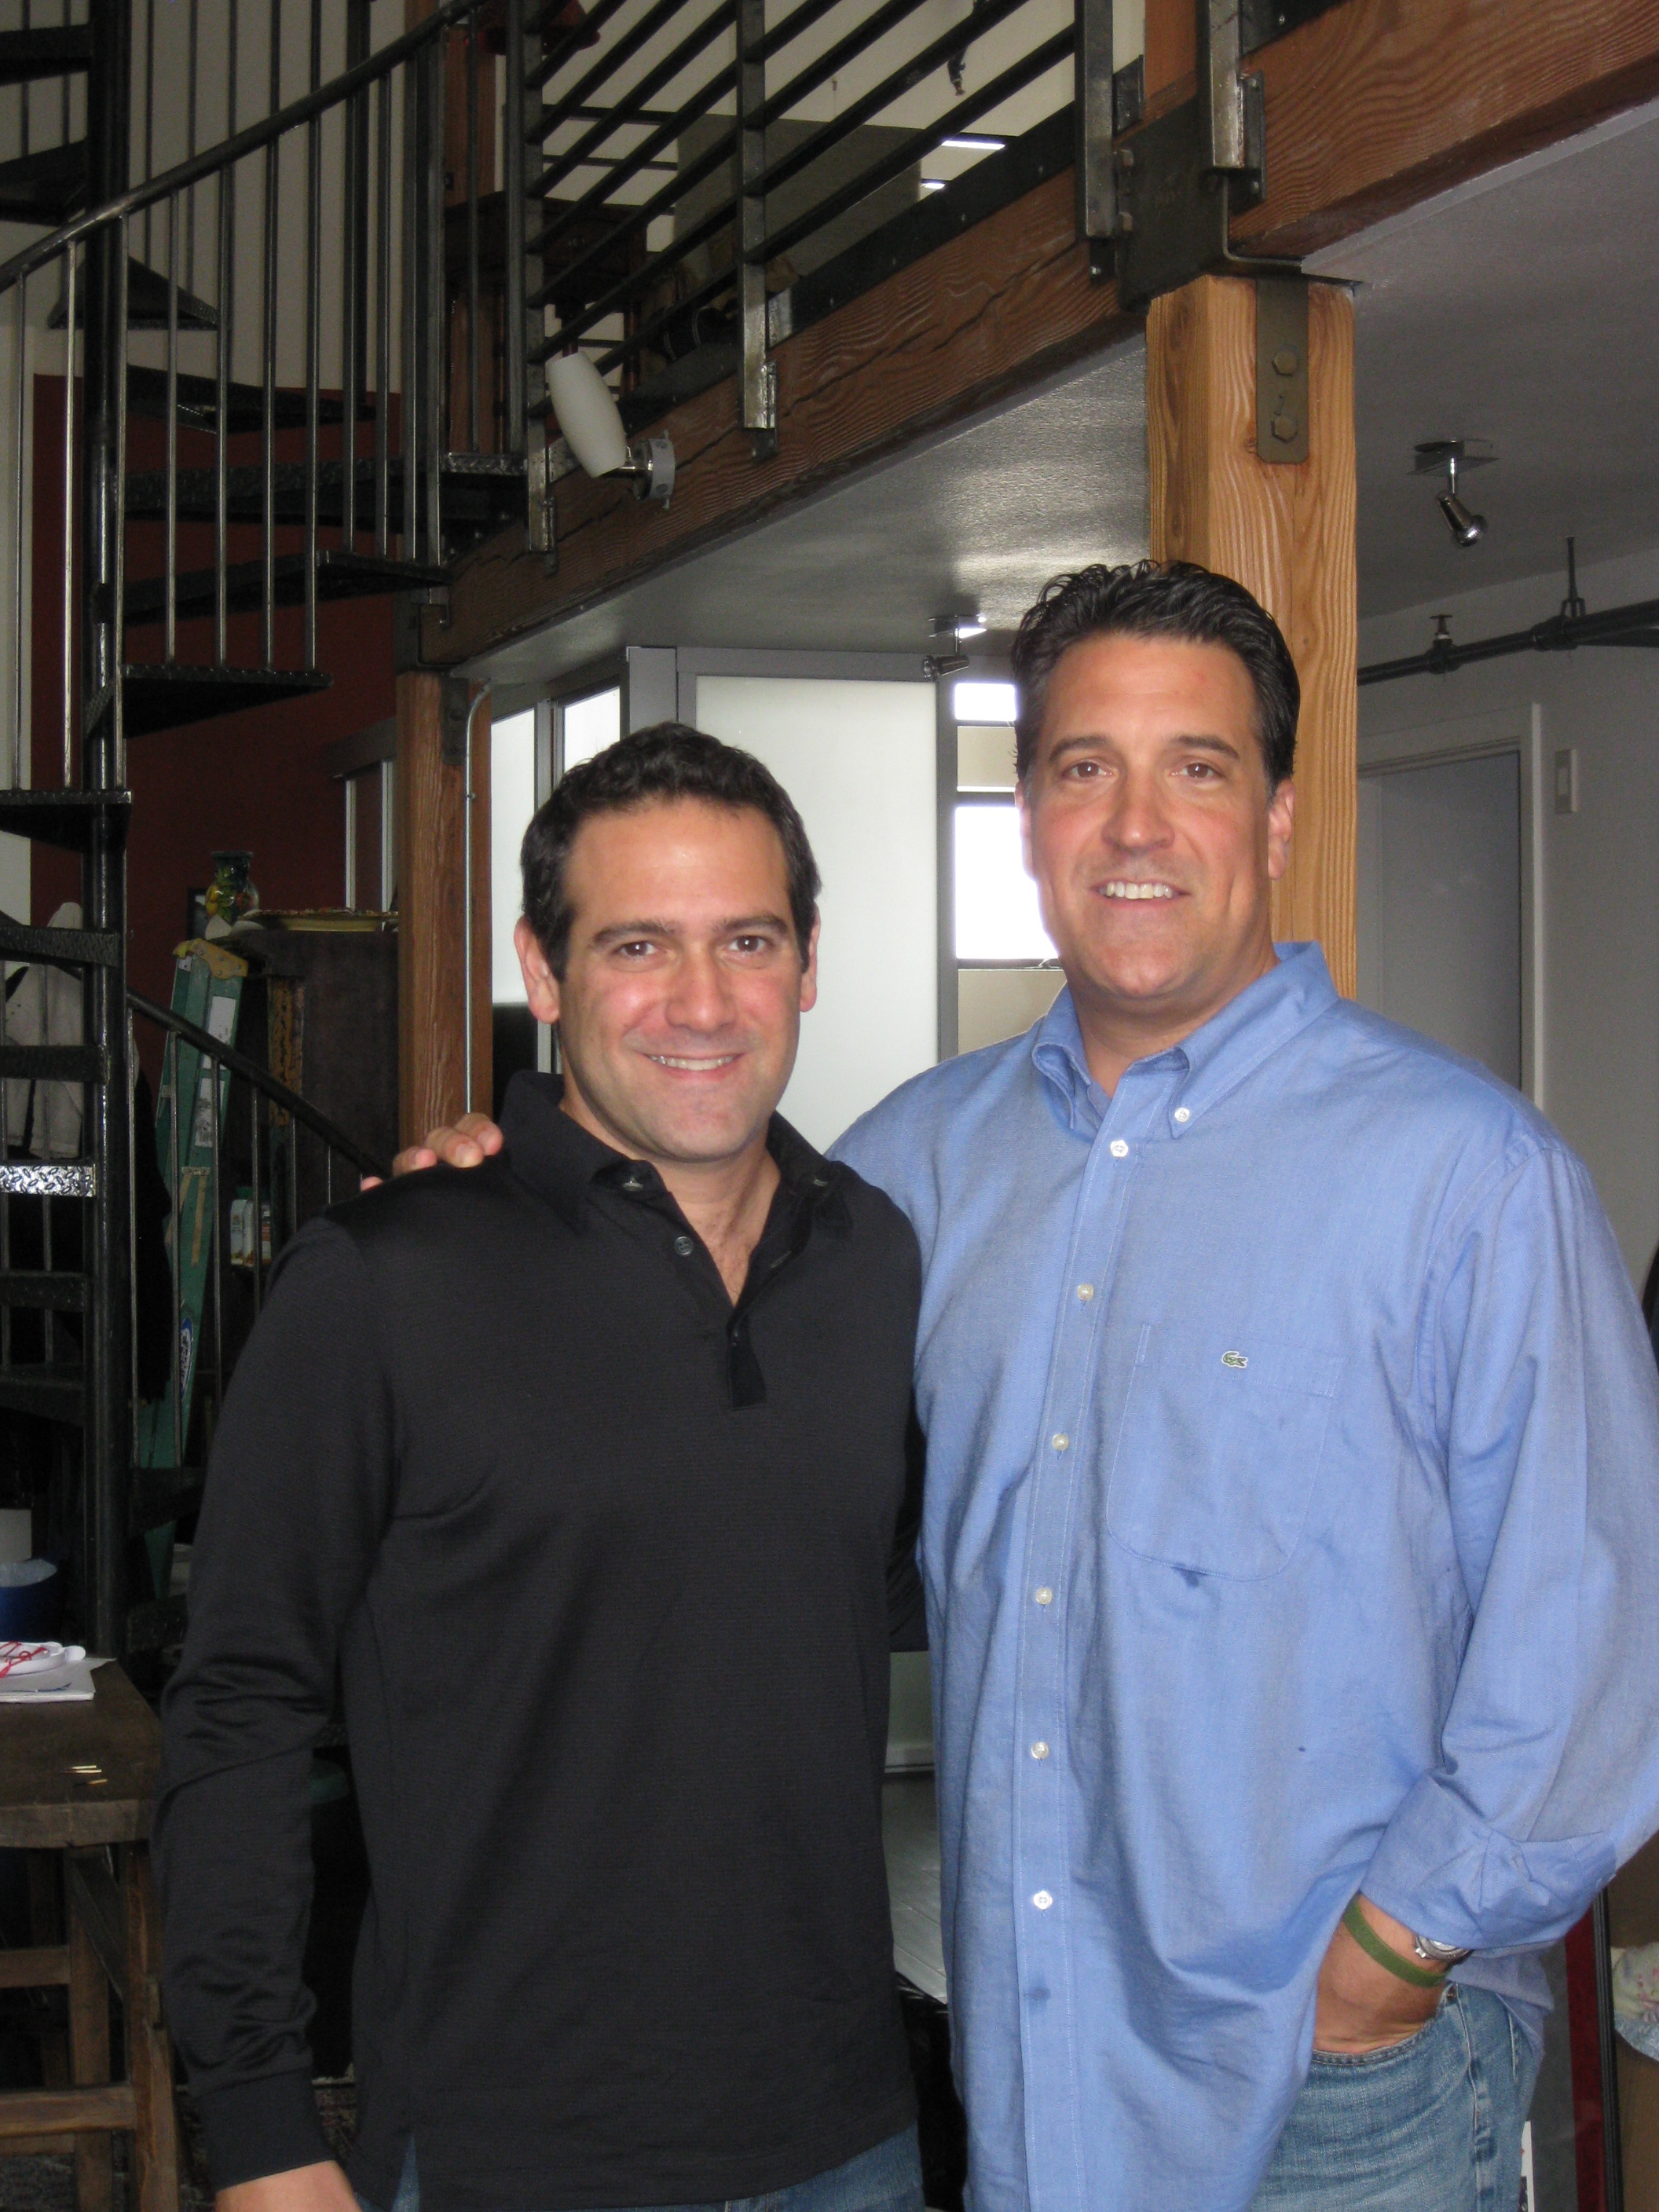 Gregg Interviews New Head Basketball coach of St. Johns University Steve Lavin, for his show Who's huge in sports?